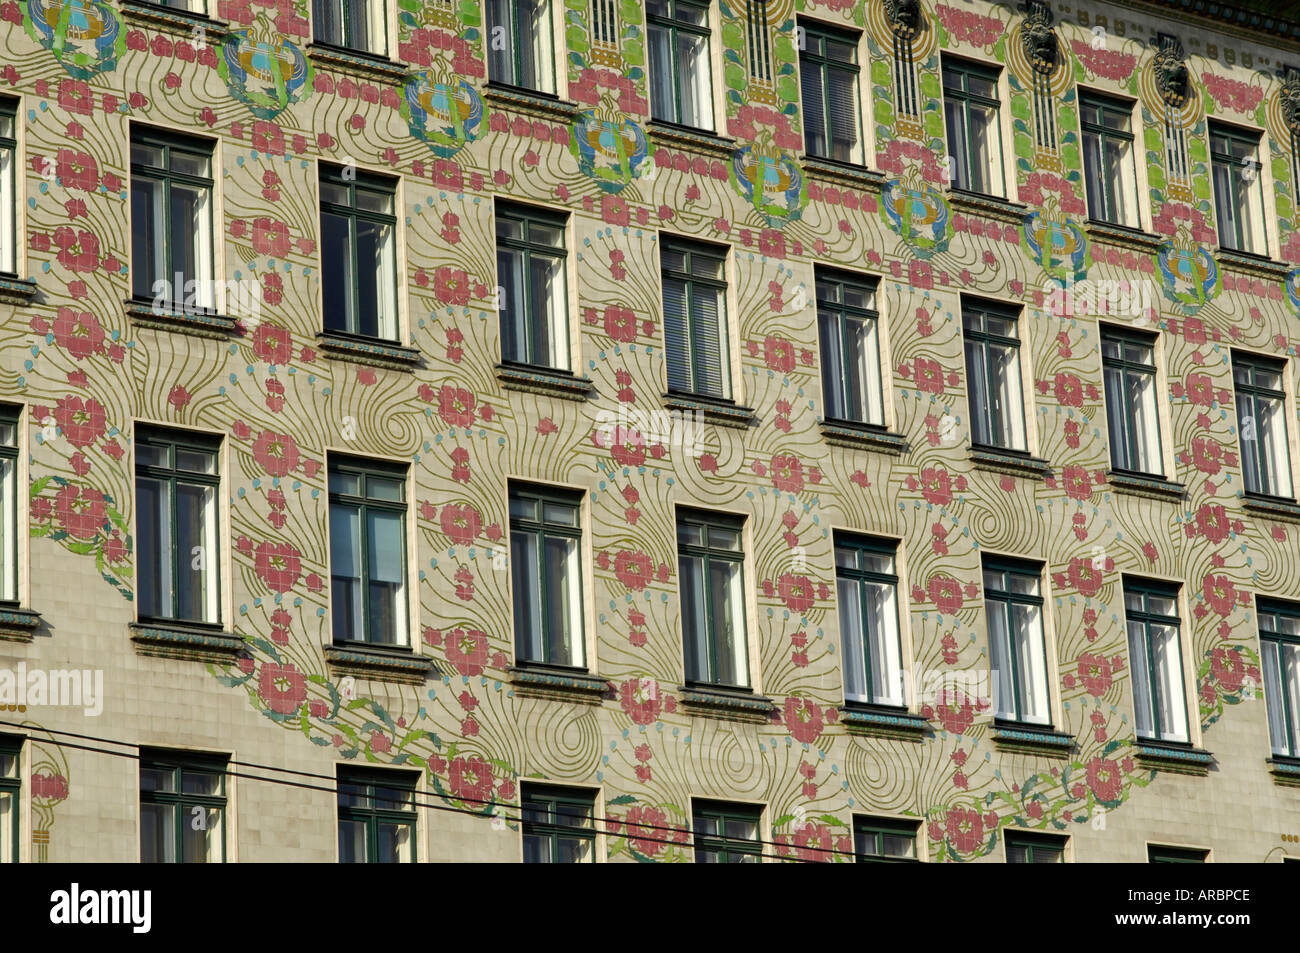 Majolikahouse by Otto Wagner at Linke Wienzeile Stock Photo